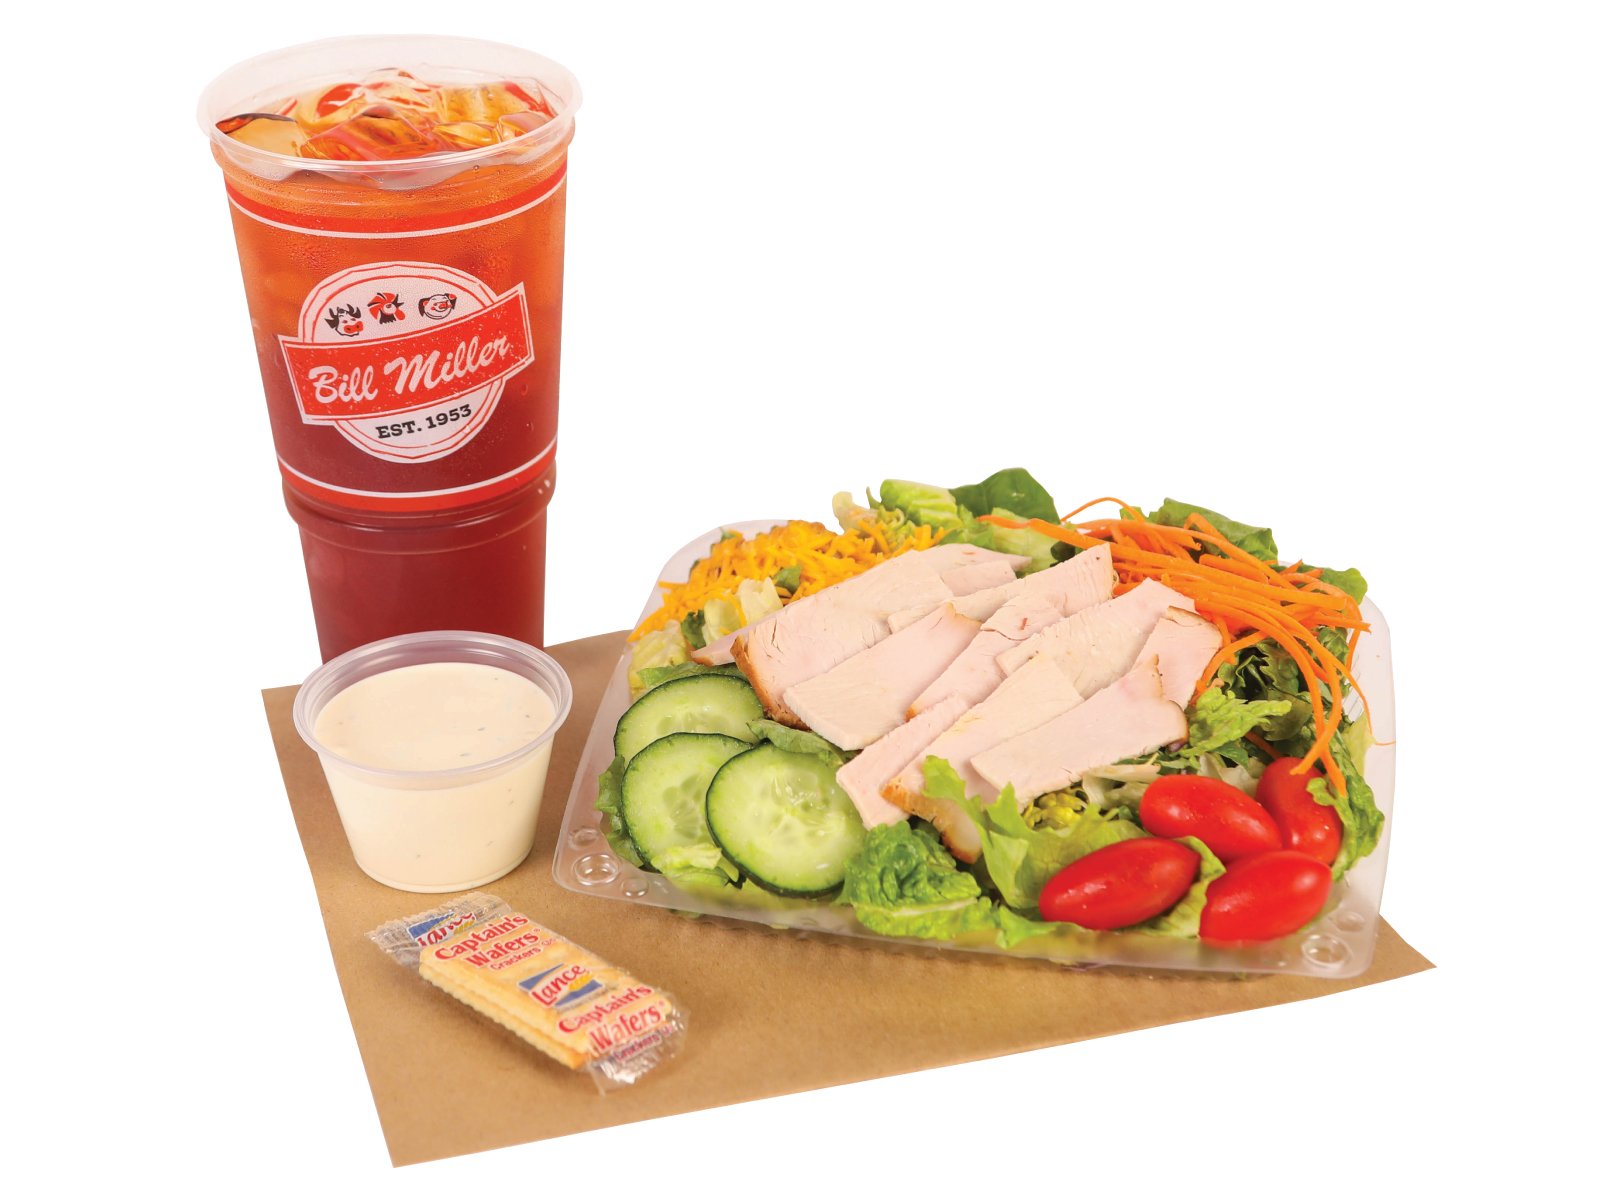 Salad Delite with turkey breast which includes, lettuce, tomatoes, crackers, cucumbers, cheese, carrots, a ranch cup, and a iced tea.